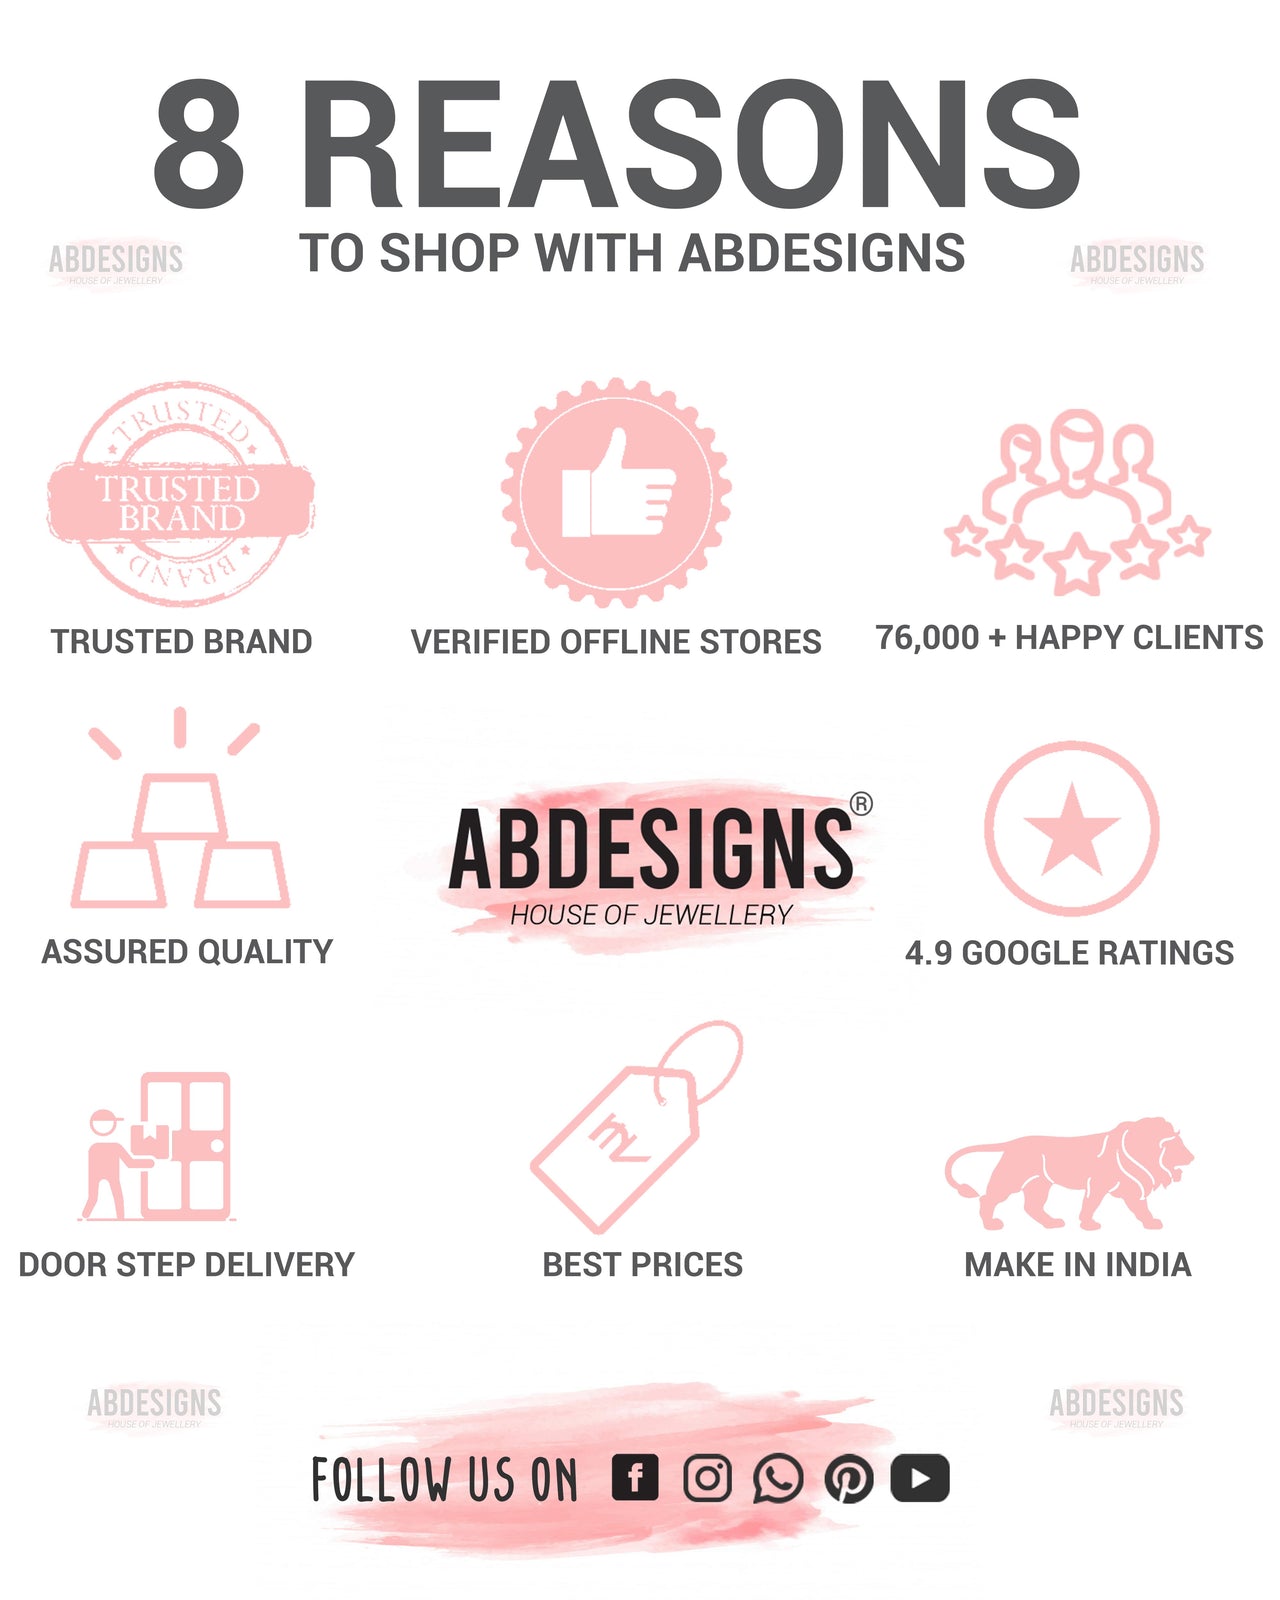 Why To Shop With abdesigns?